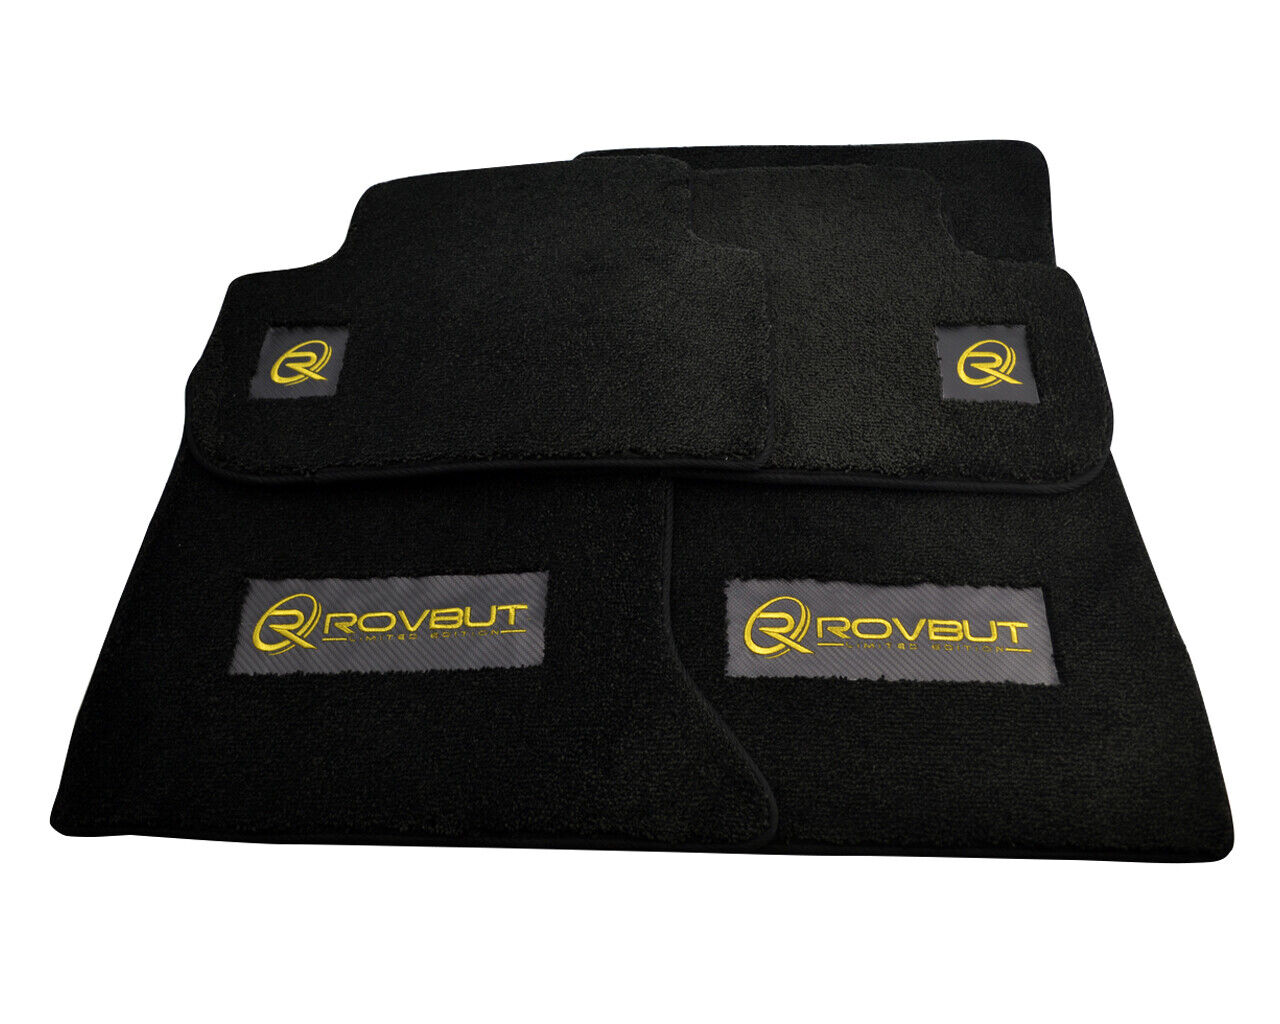 Floor Mats For Rolls Royce Wraith 2013-2017 Tailored Carpets With ROVBUT Emblem 